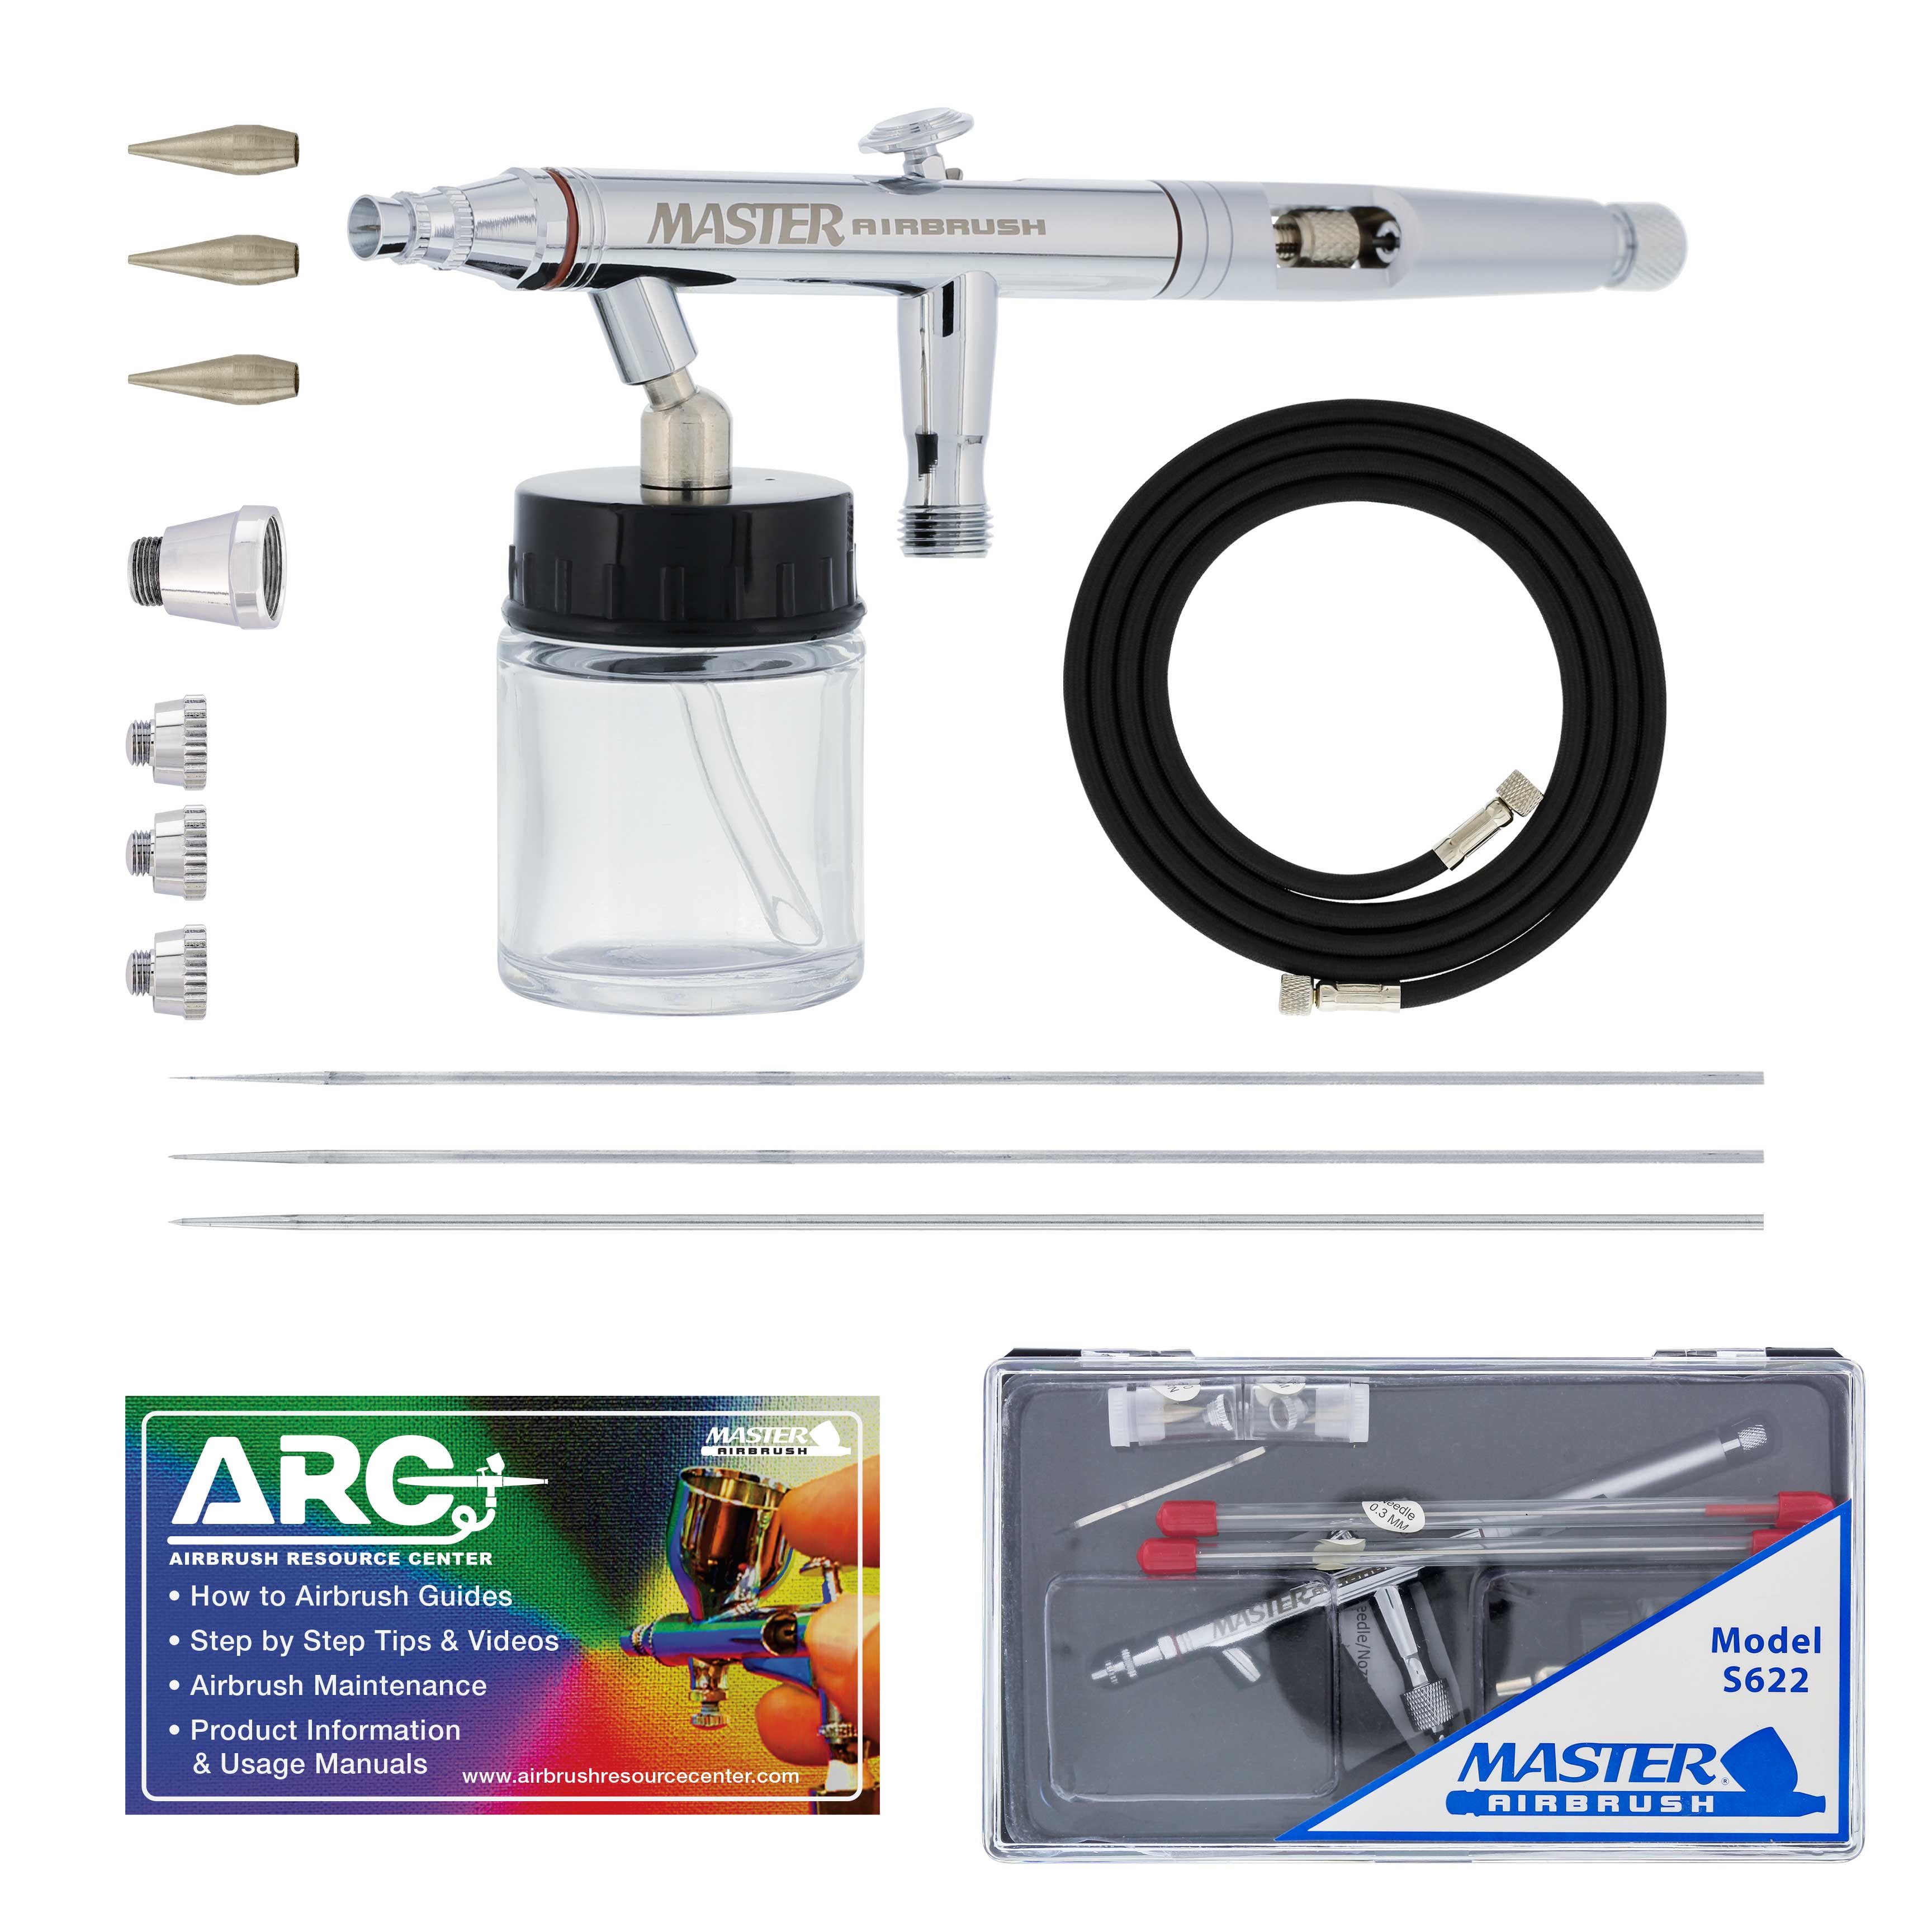 Dual Fan Air Compressor System Dual-Action Siphon Feed Airbrush